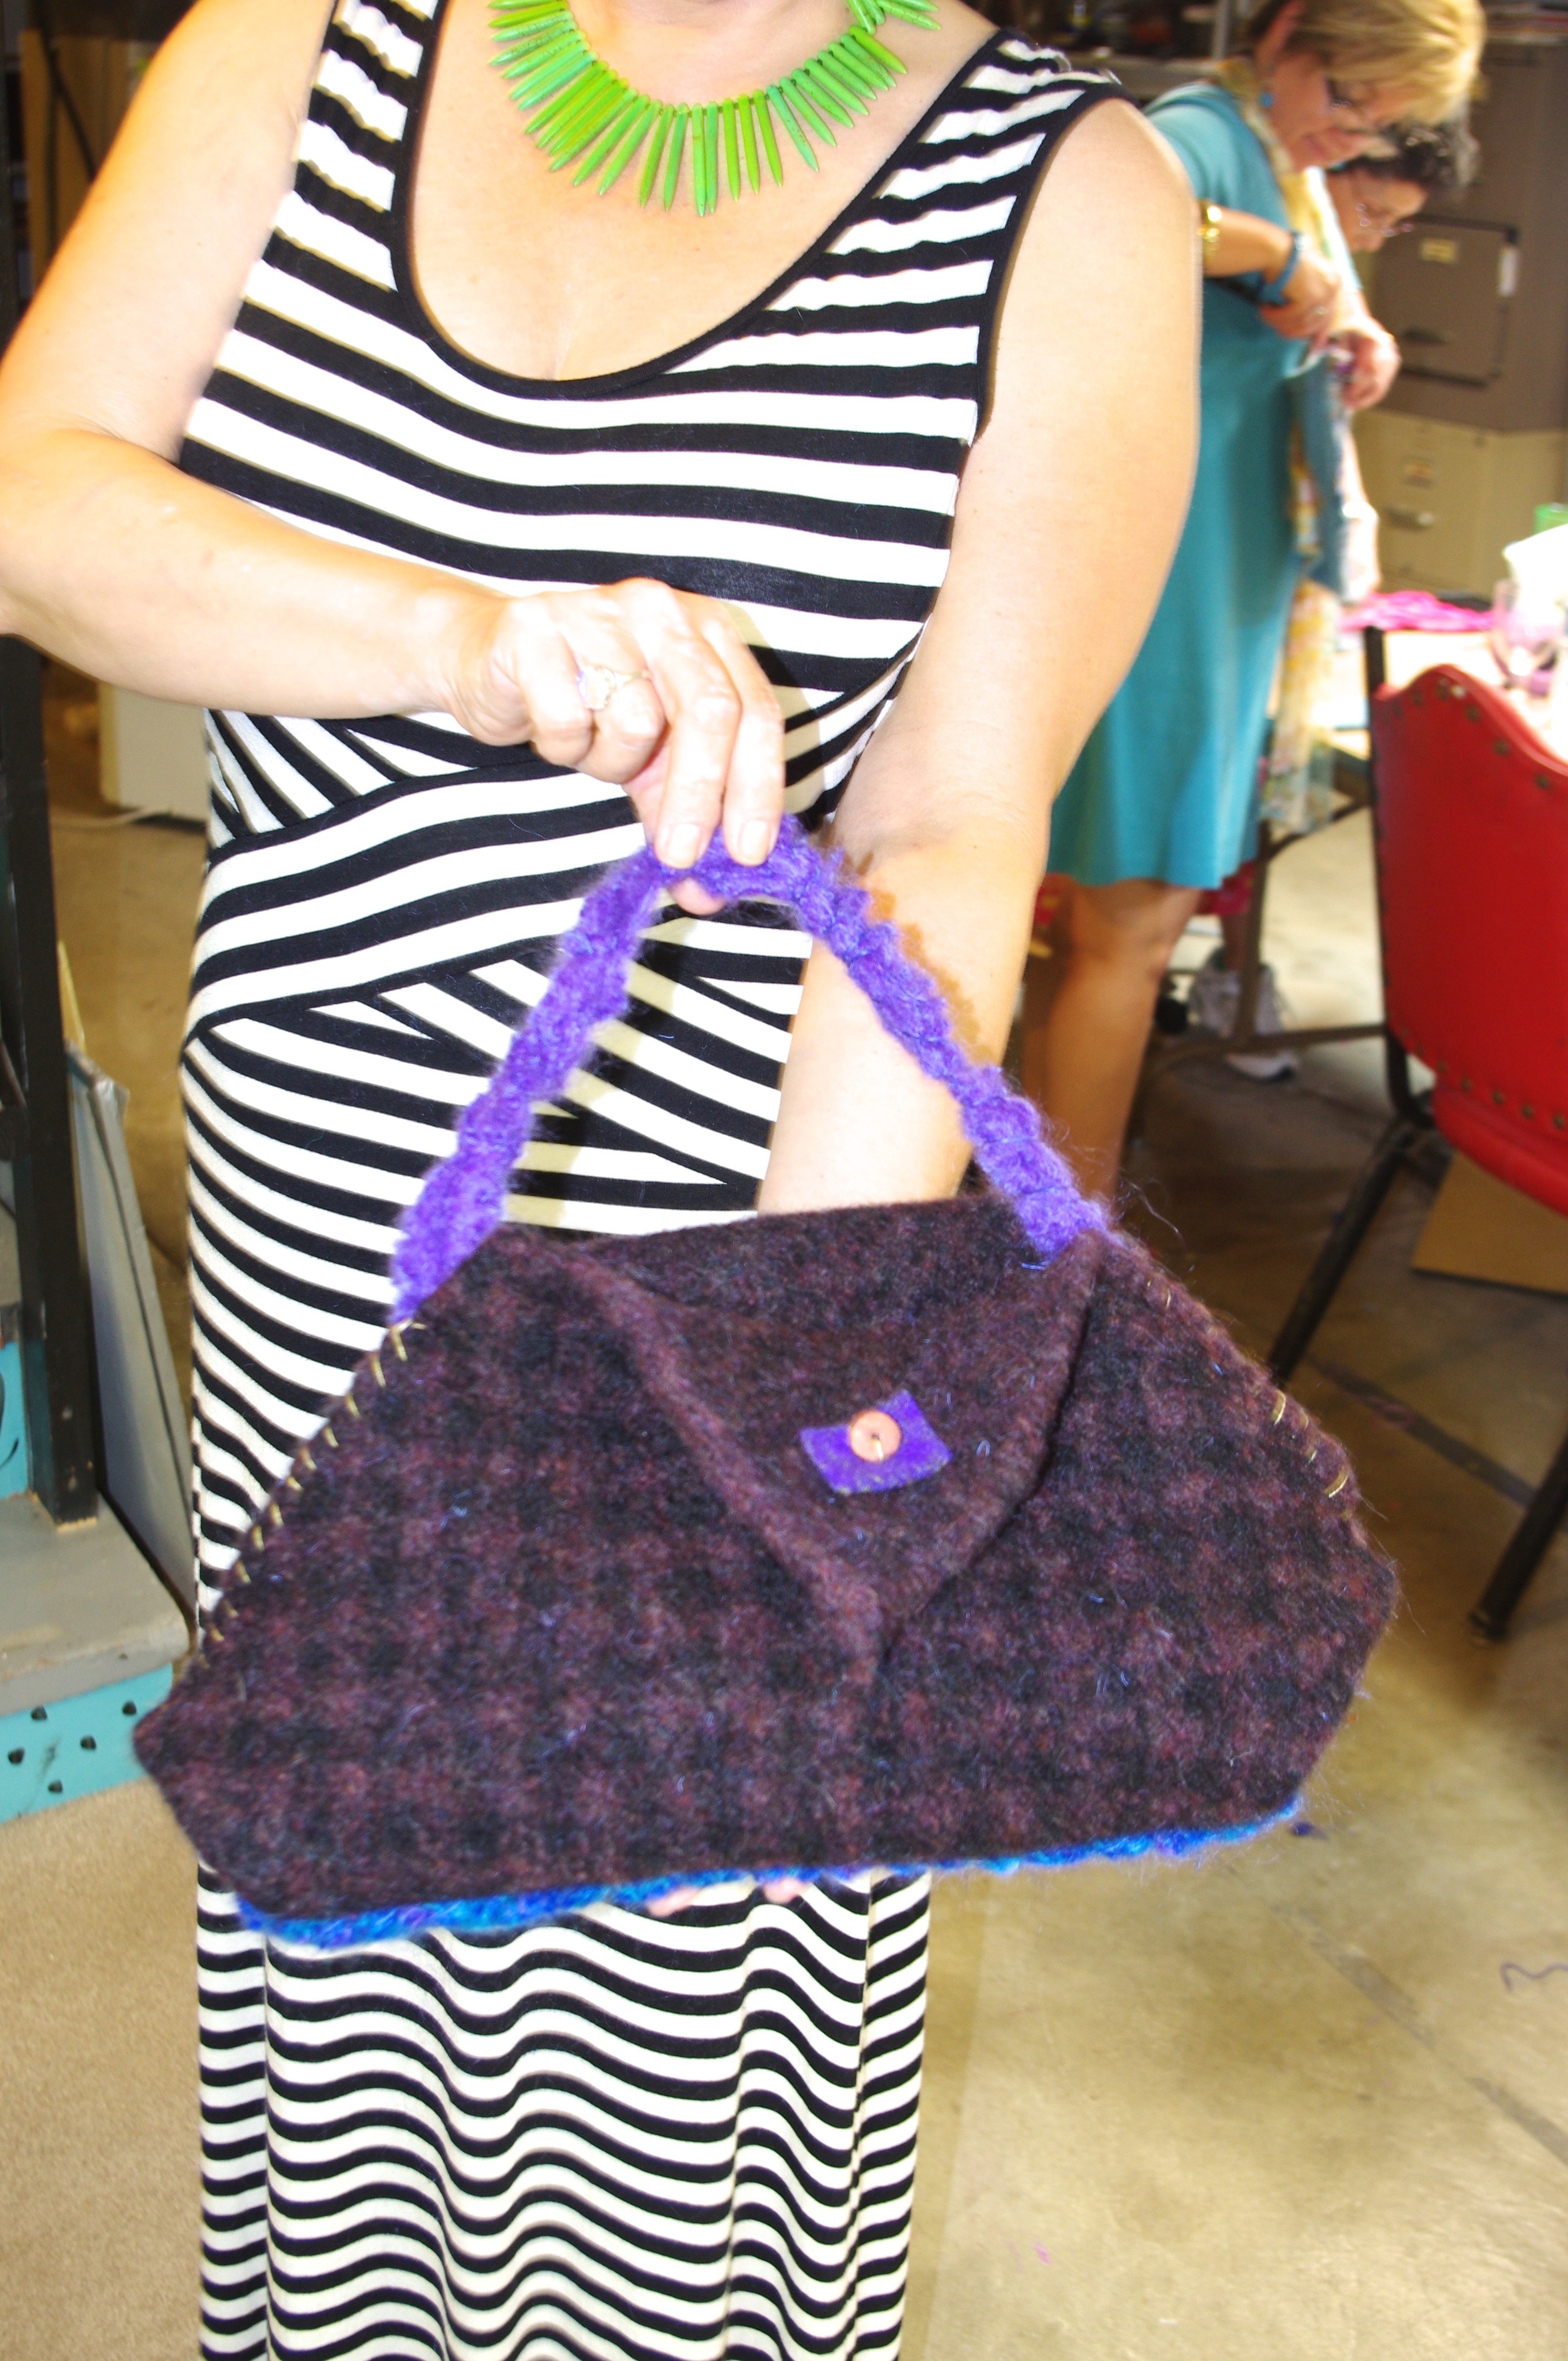 Original purse made of a wool sweater created in a 3 hour sewing workshop!